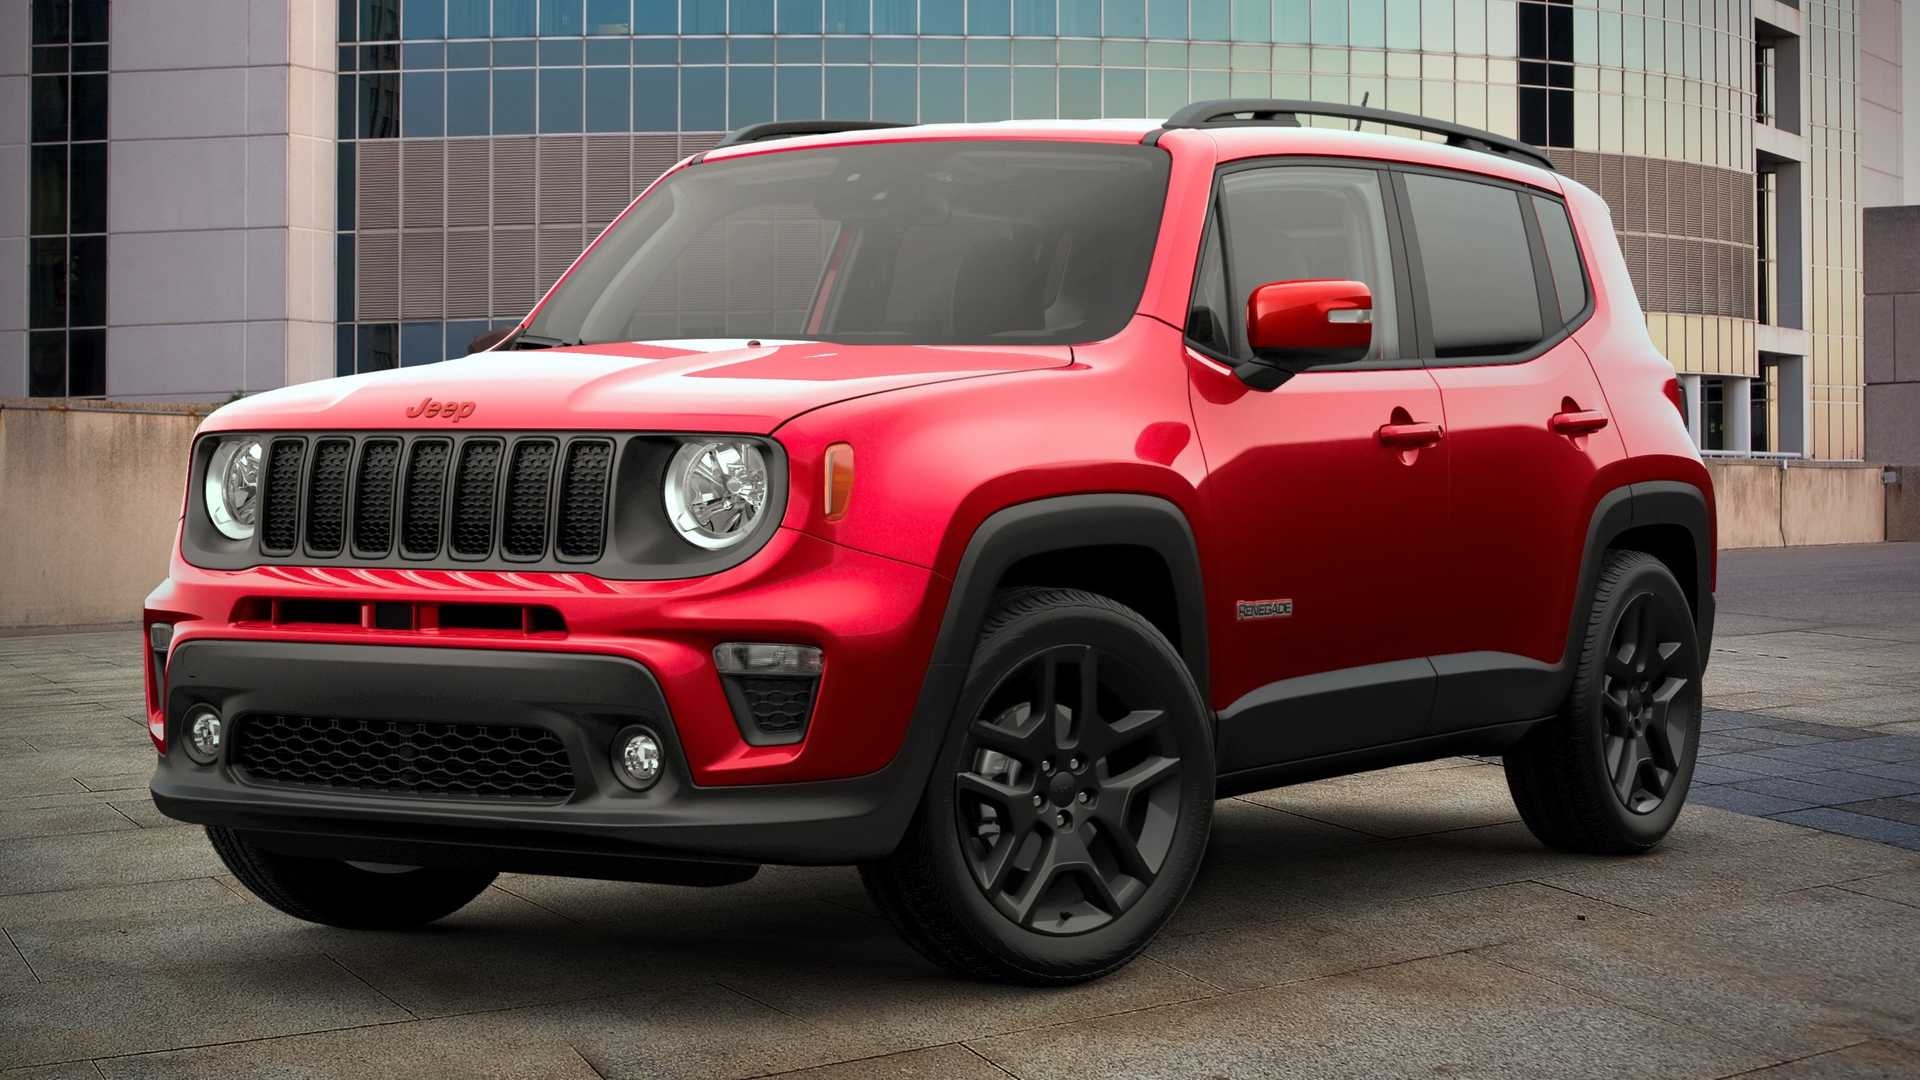 Jeep Renegade, Red Edition, 2022 lineup, Order books open, 1920x1080 Full HD Desktop